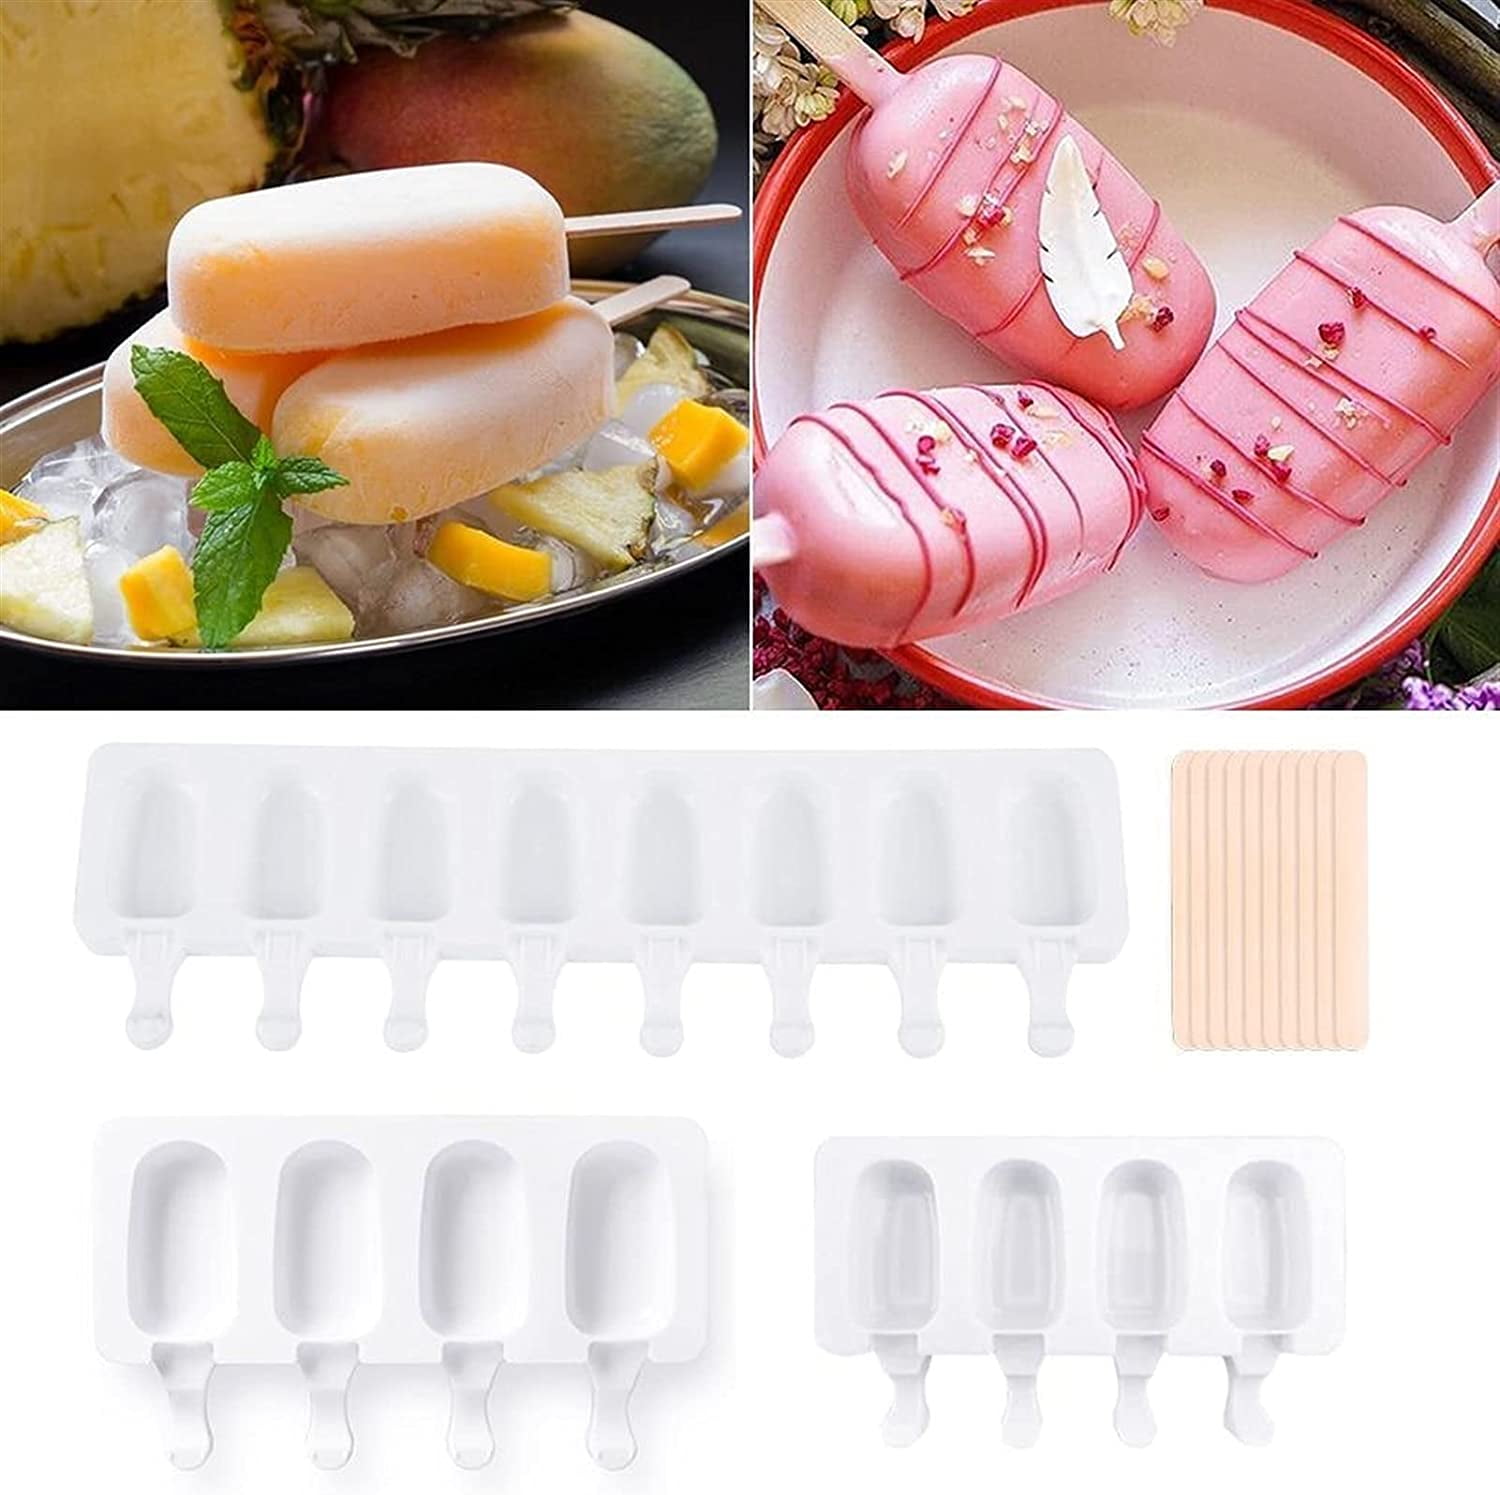 LA TALUS 4 Cavities Silicone Mold Compartment DIY Geometric Texture  Non-stick Summer Ice Cream Mold Household Supplies style J One Size 